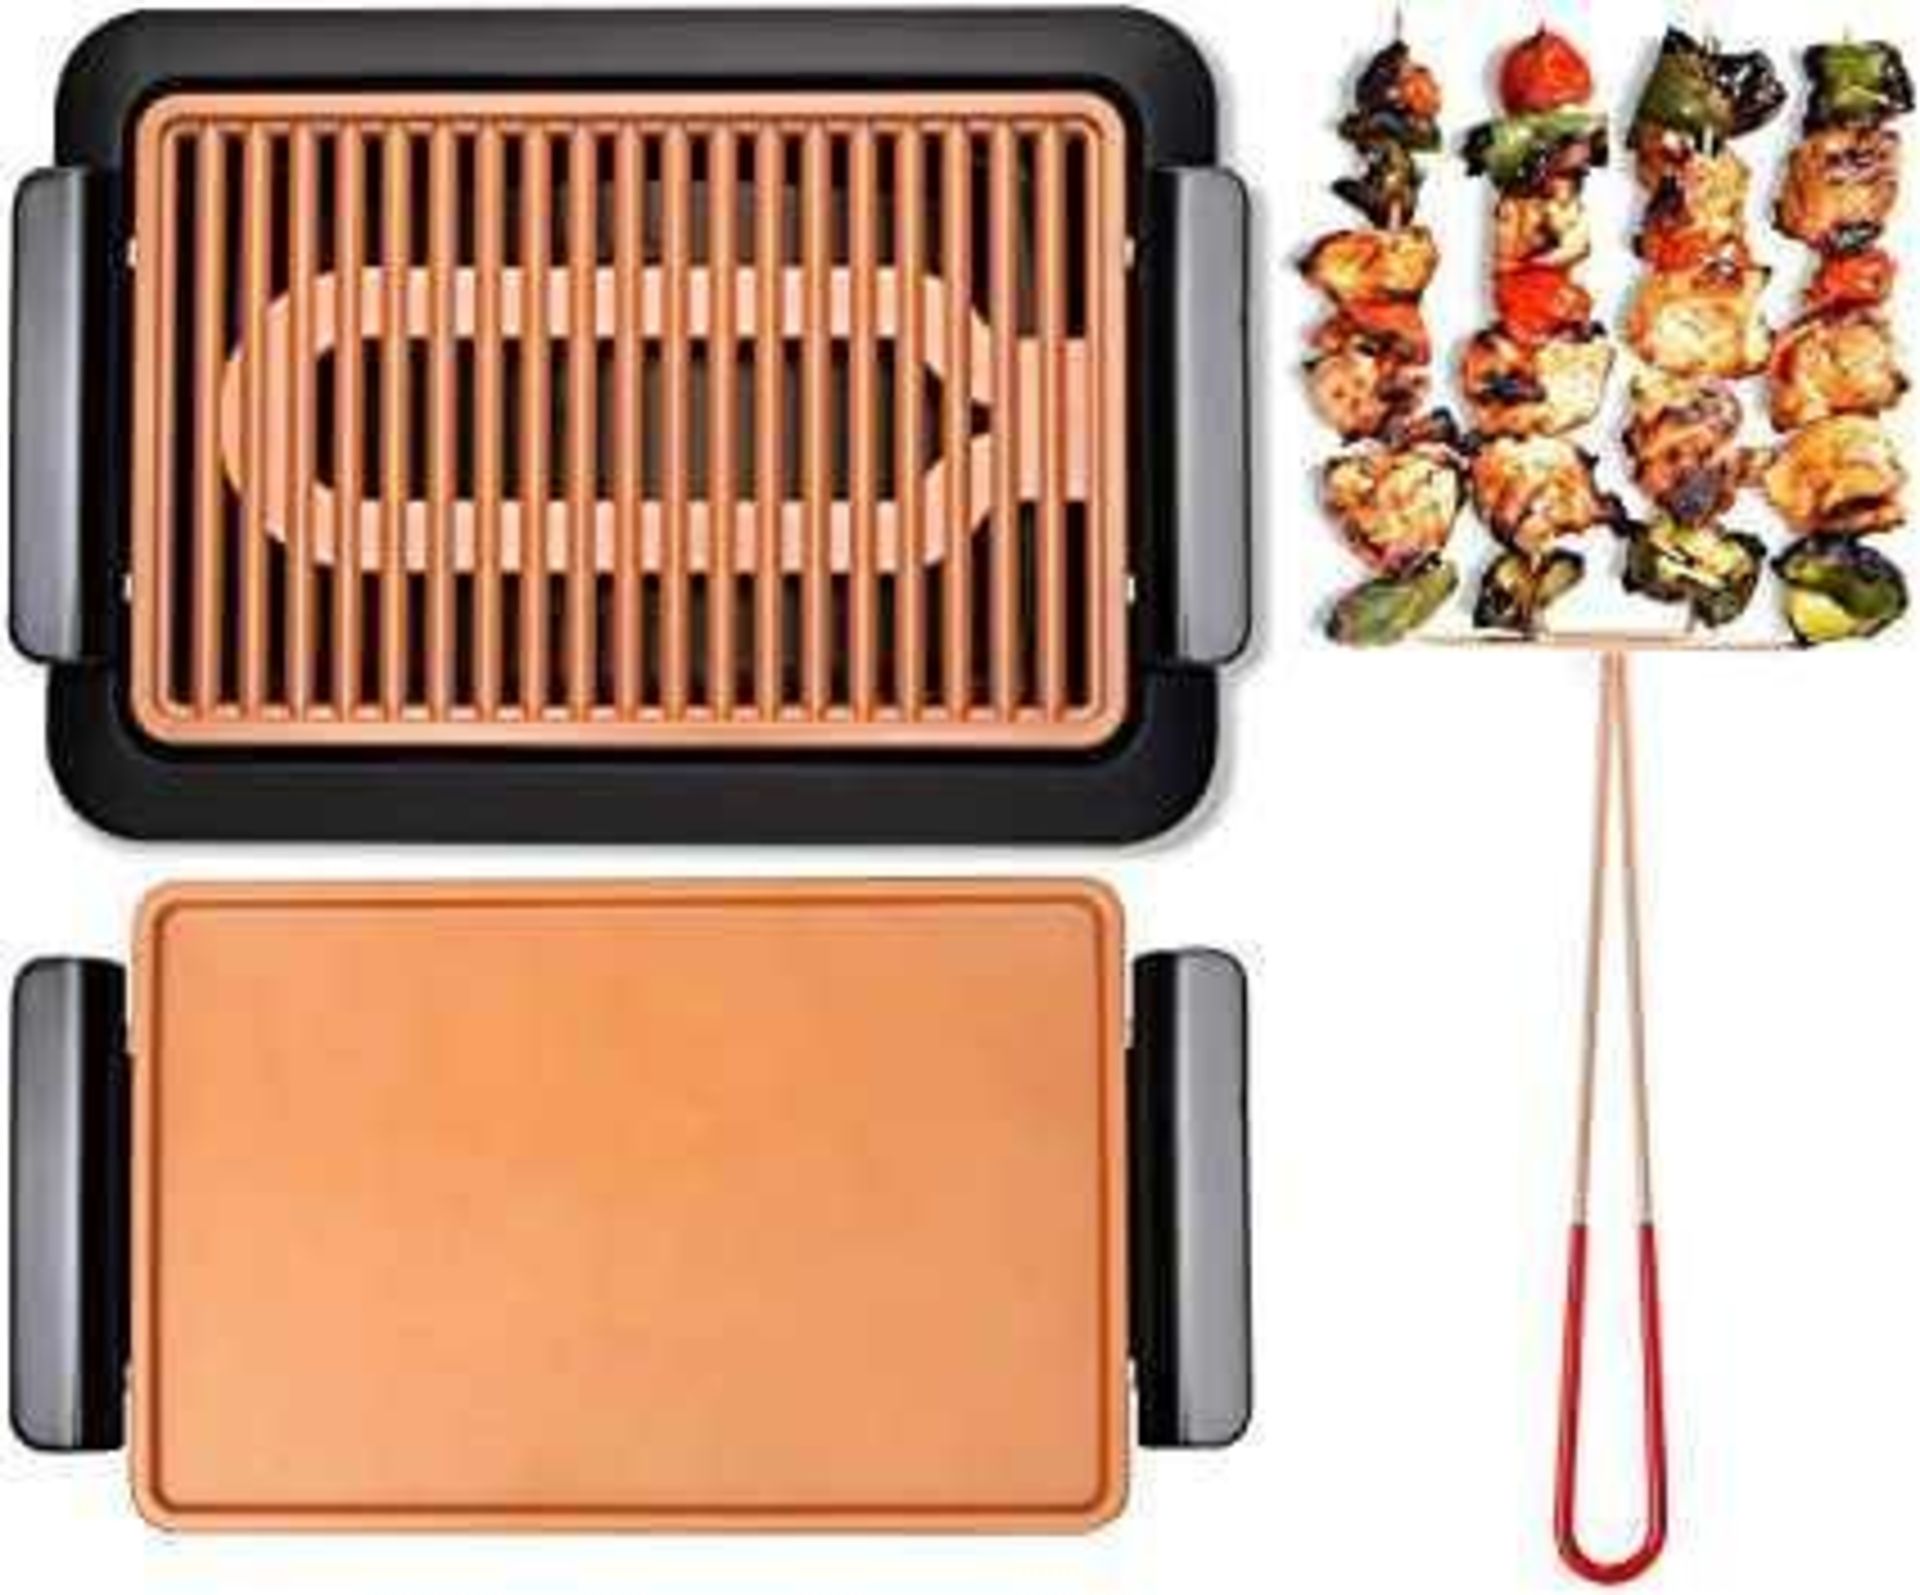 RRP £50 Each Bagged Electric Smoke-Less Grill By Gotham Steel.